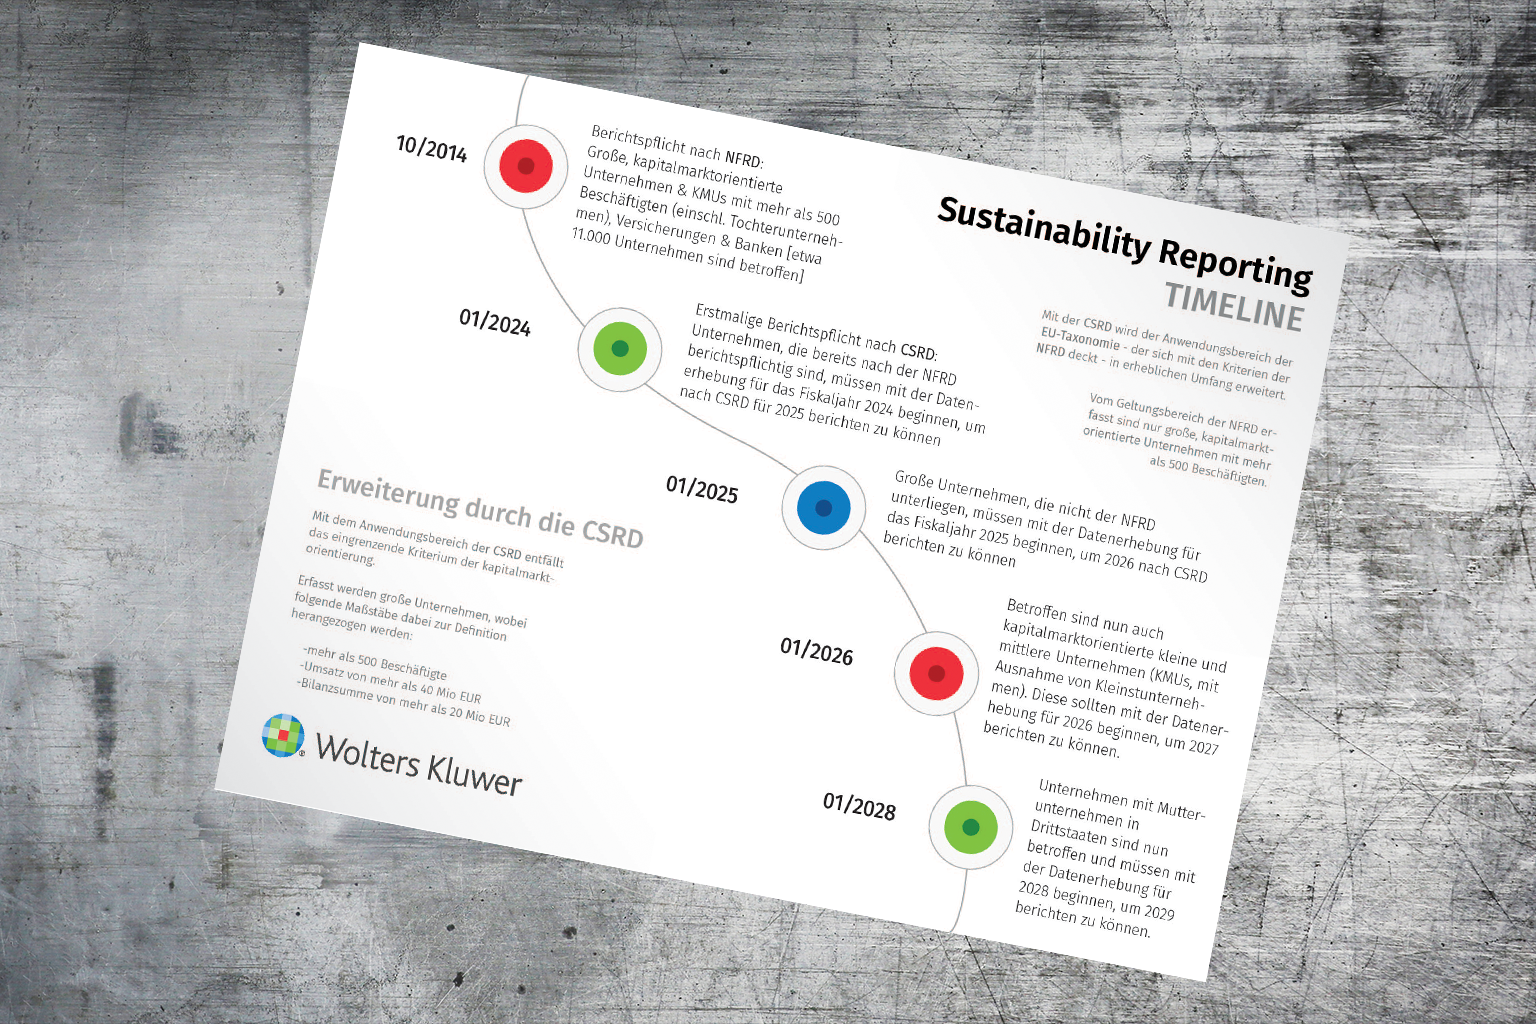 Sustainability Reporting Timeline